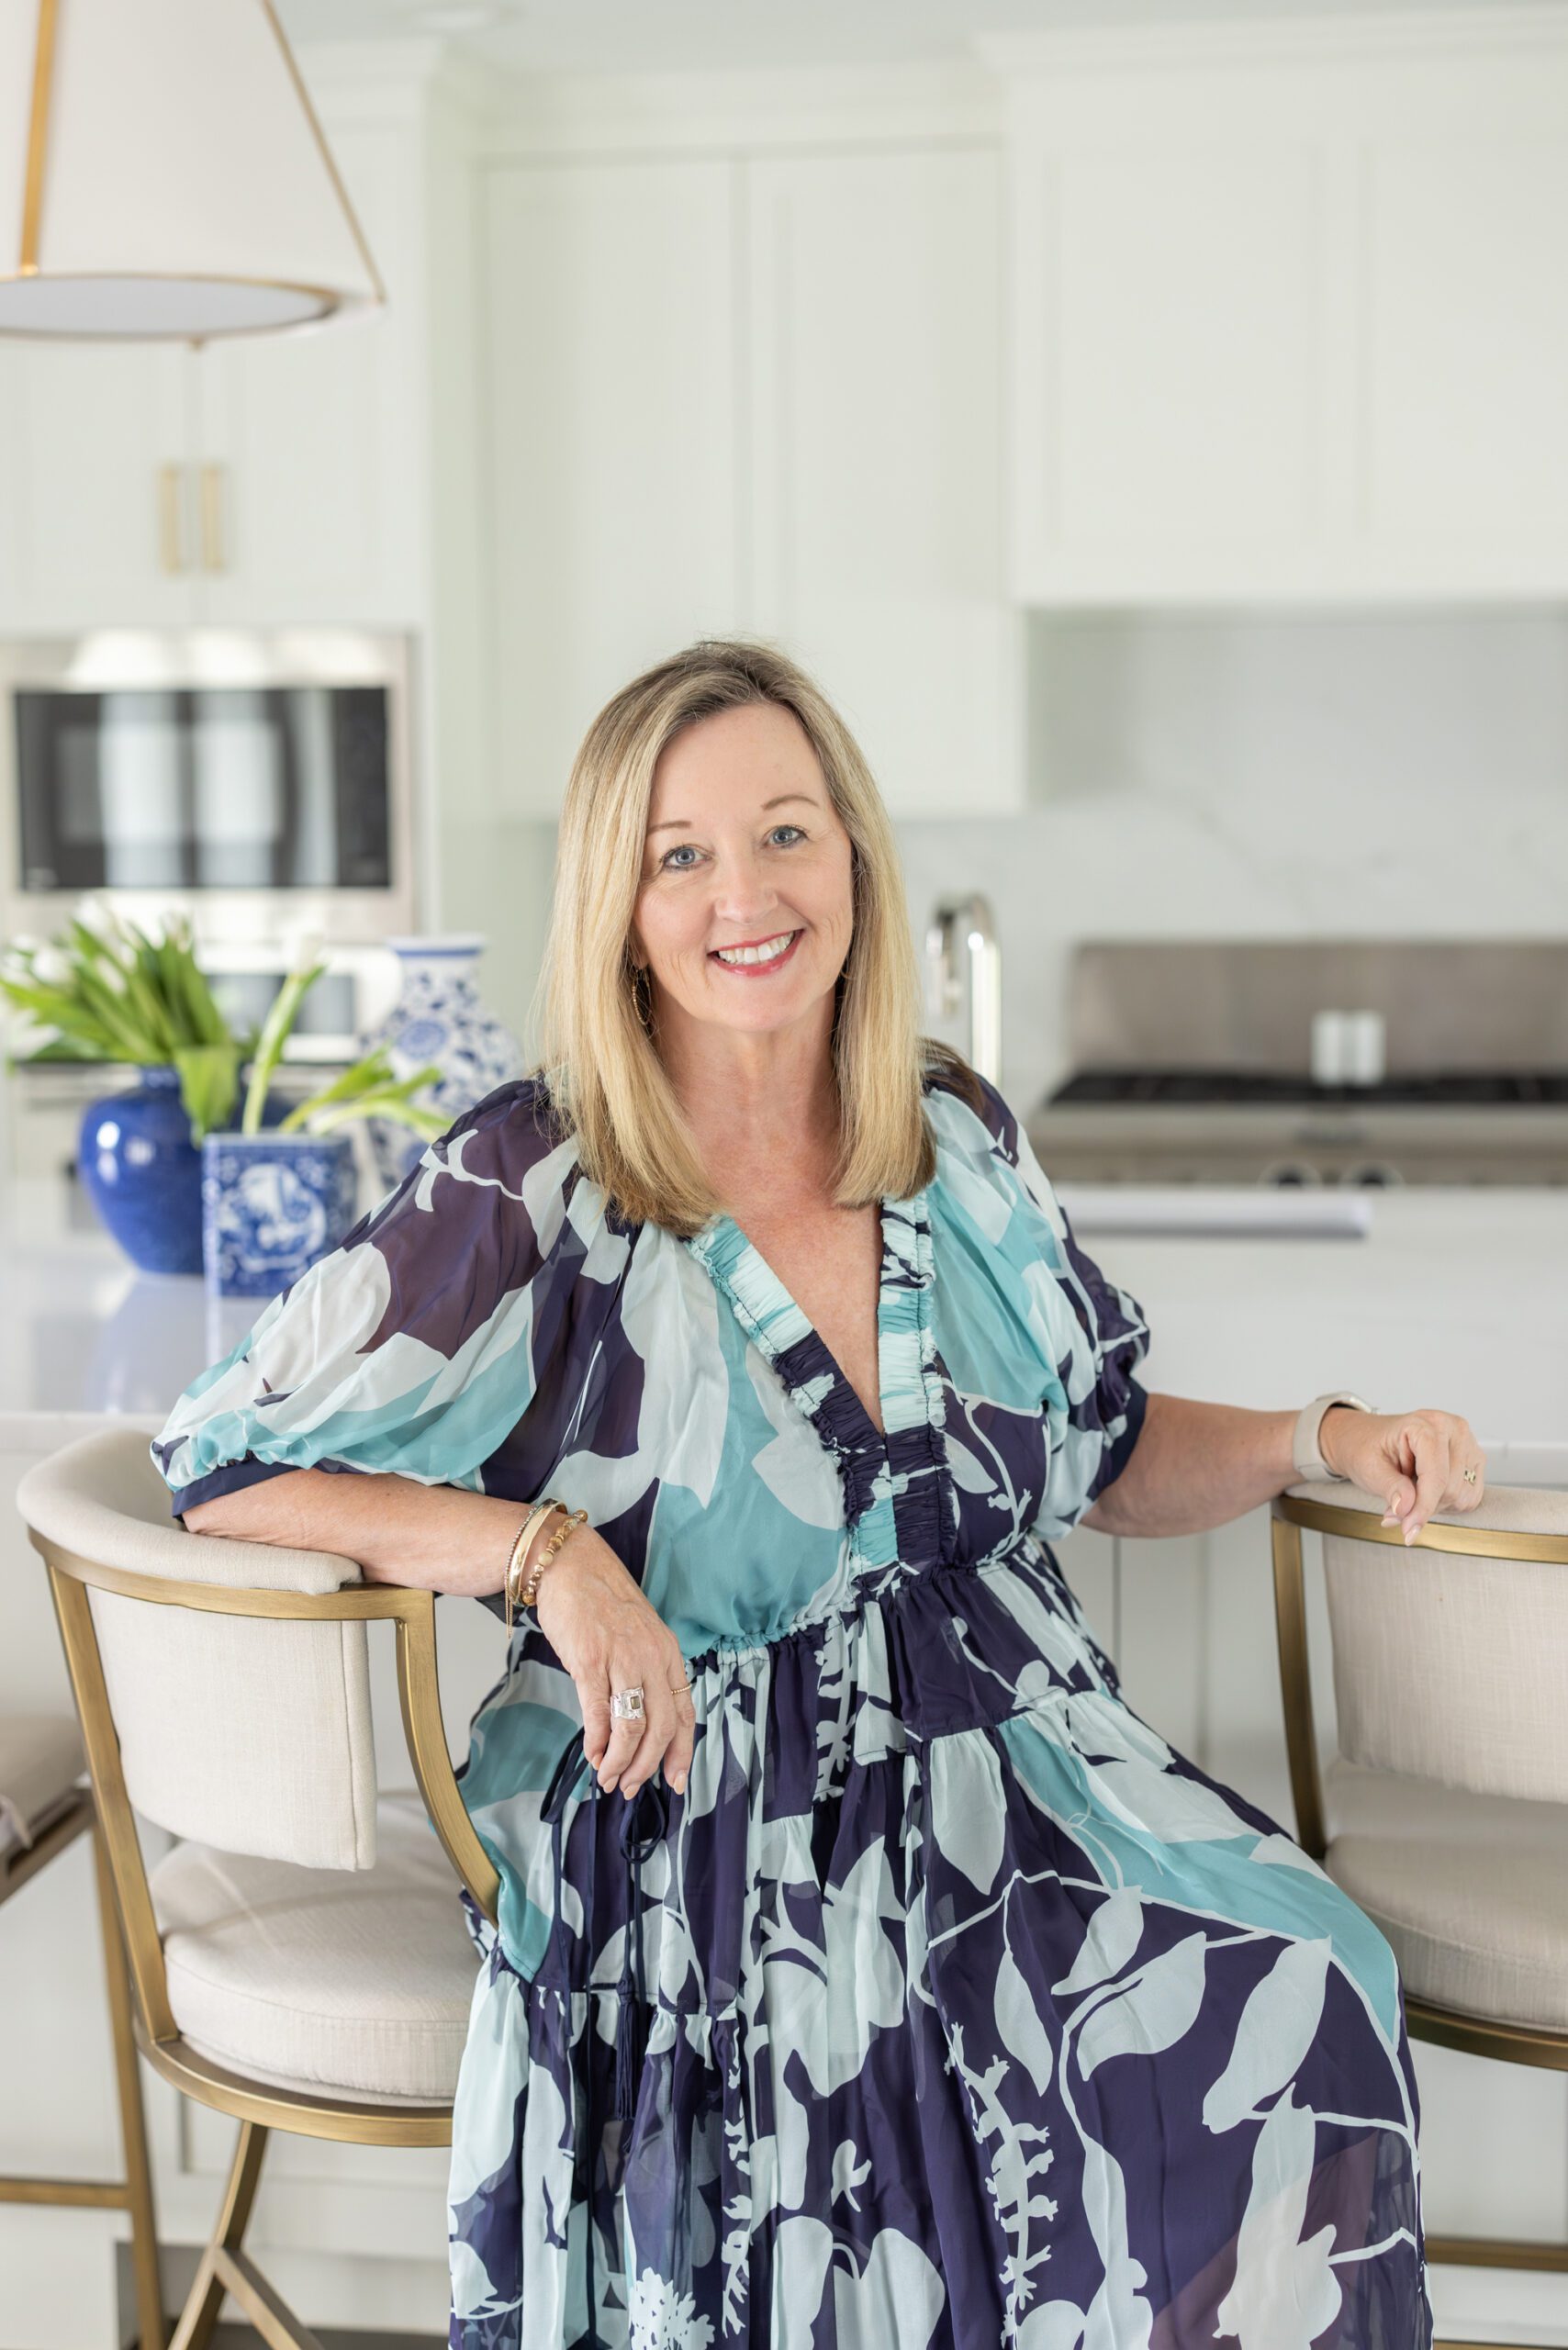 Our owner and principal designer, Julia Kirkendall, seated in an interior design kitchen project